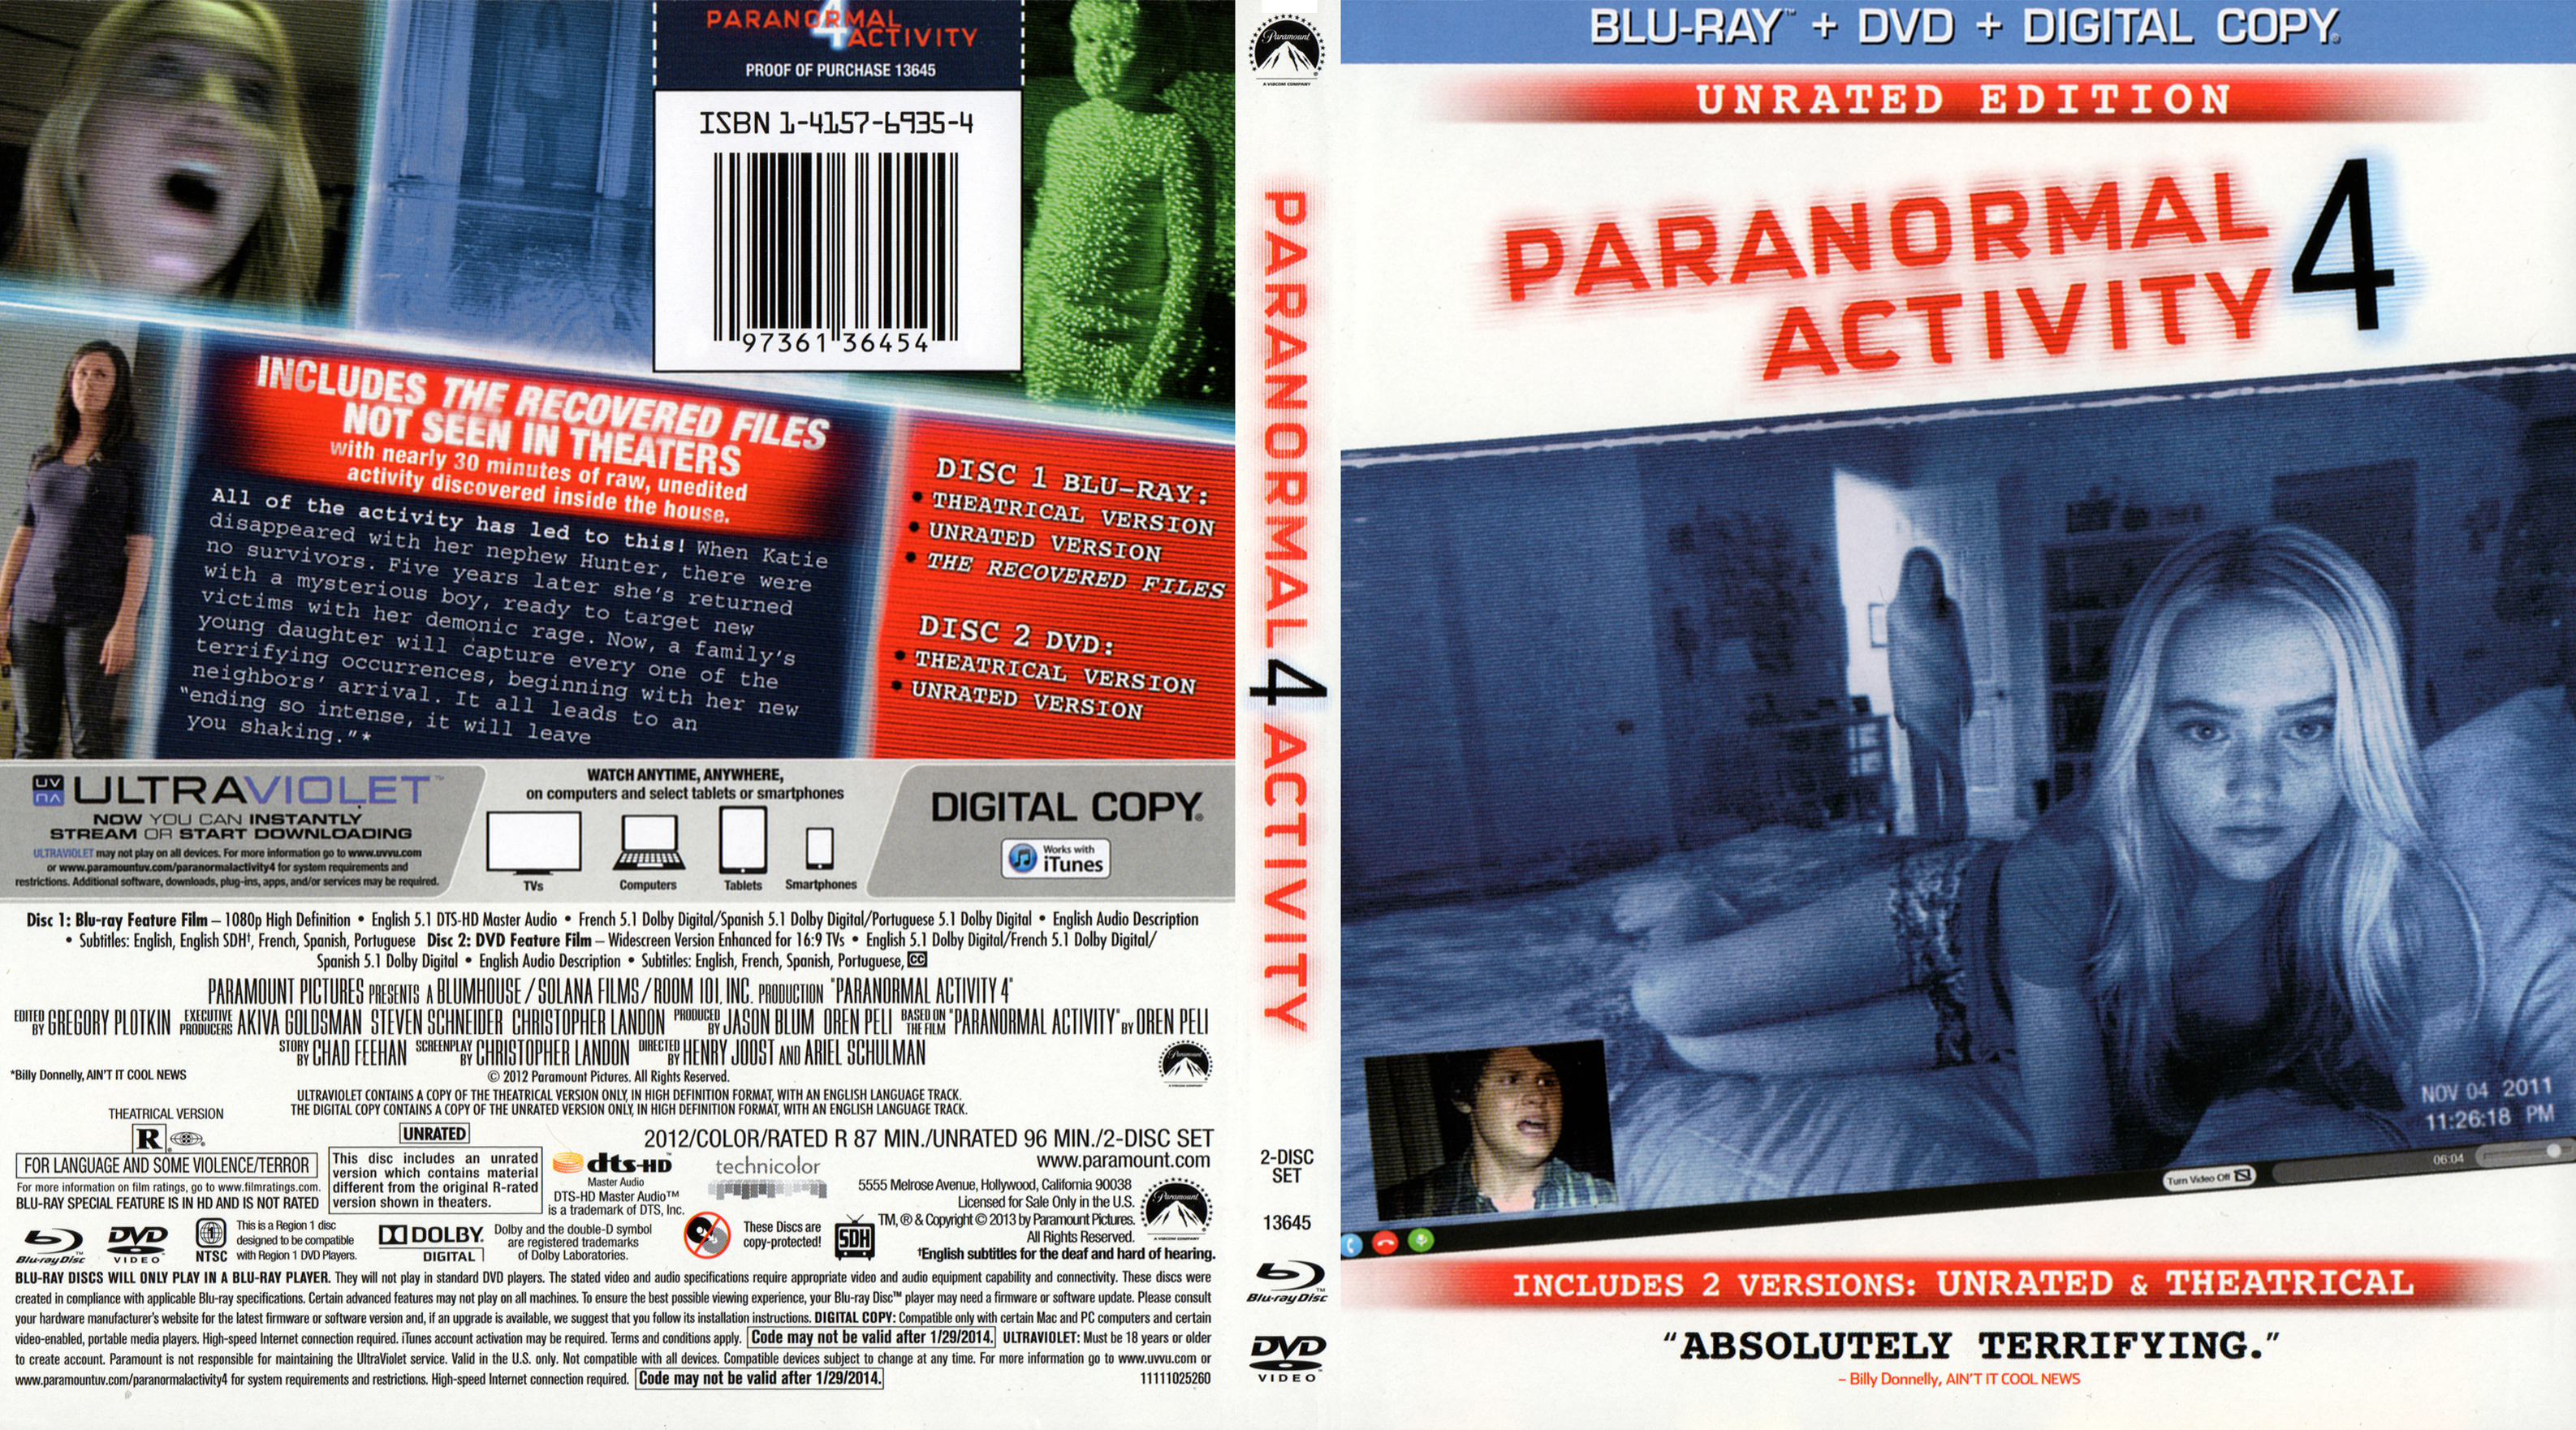 Jaquette DVD Paranormal activity 4 Zone 1 (BLU-RAY)